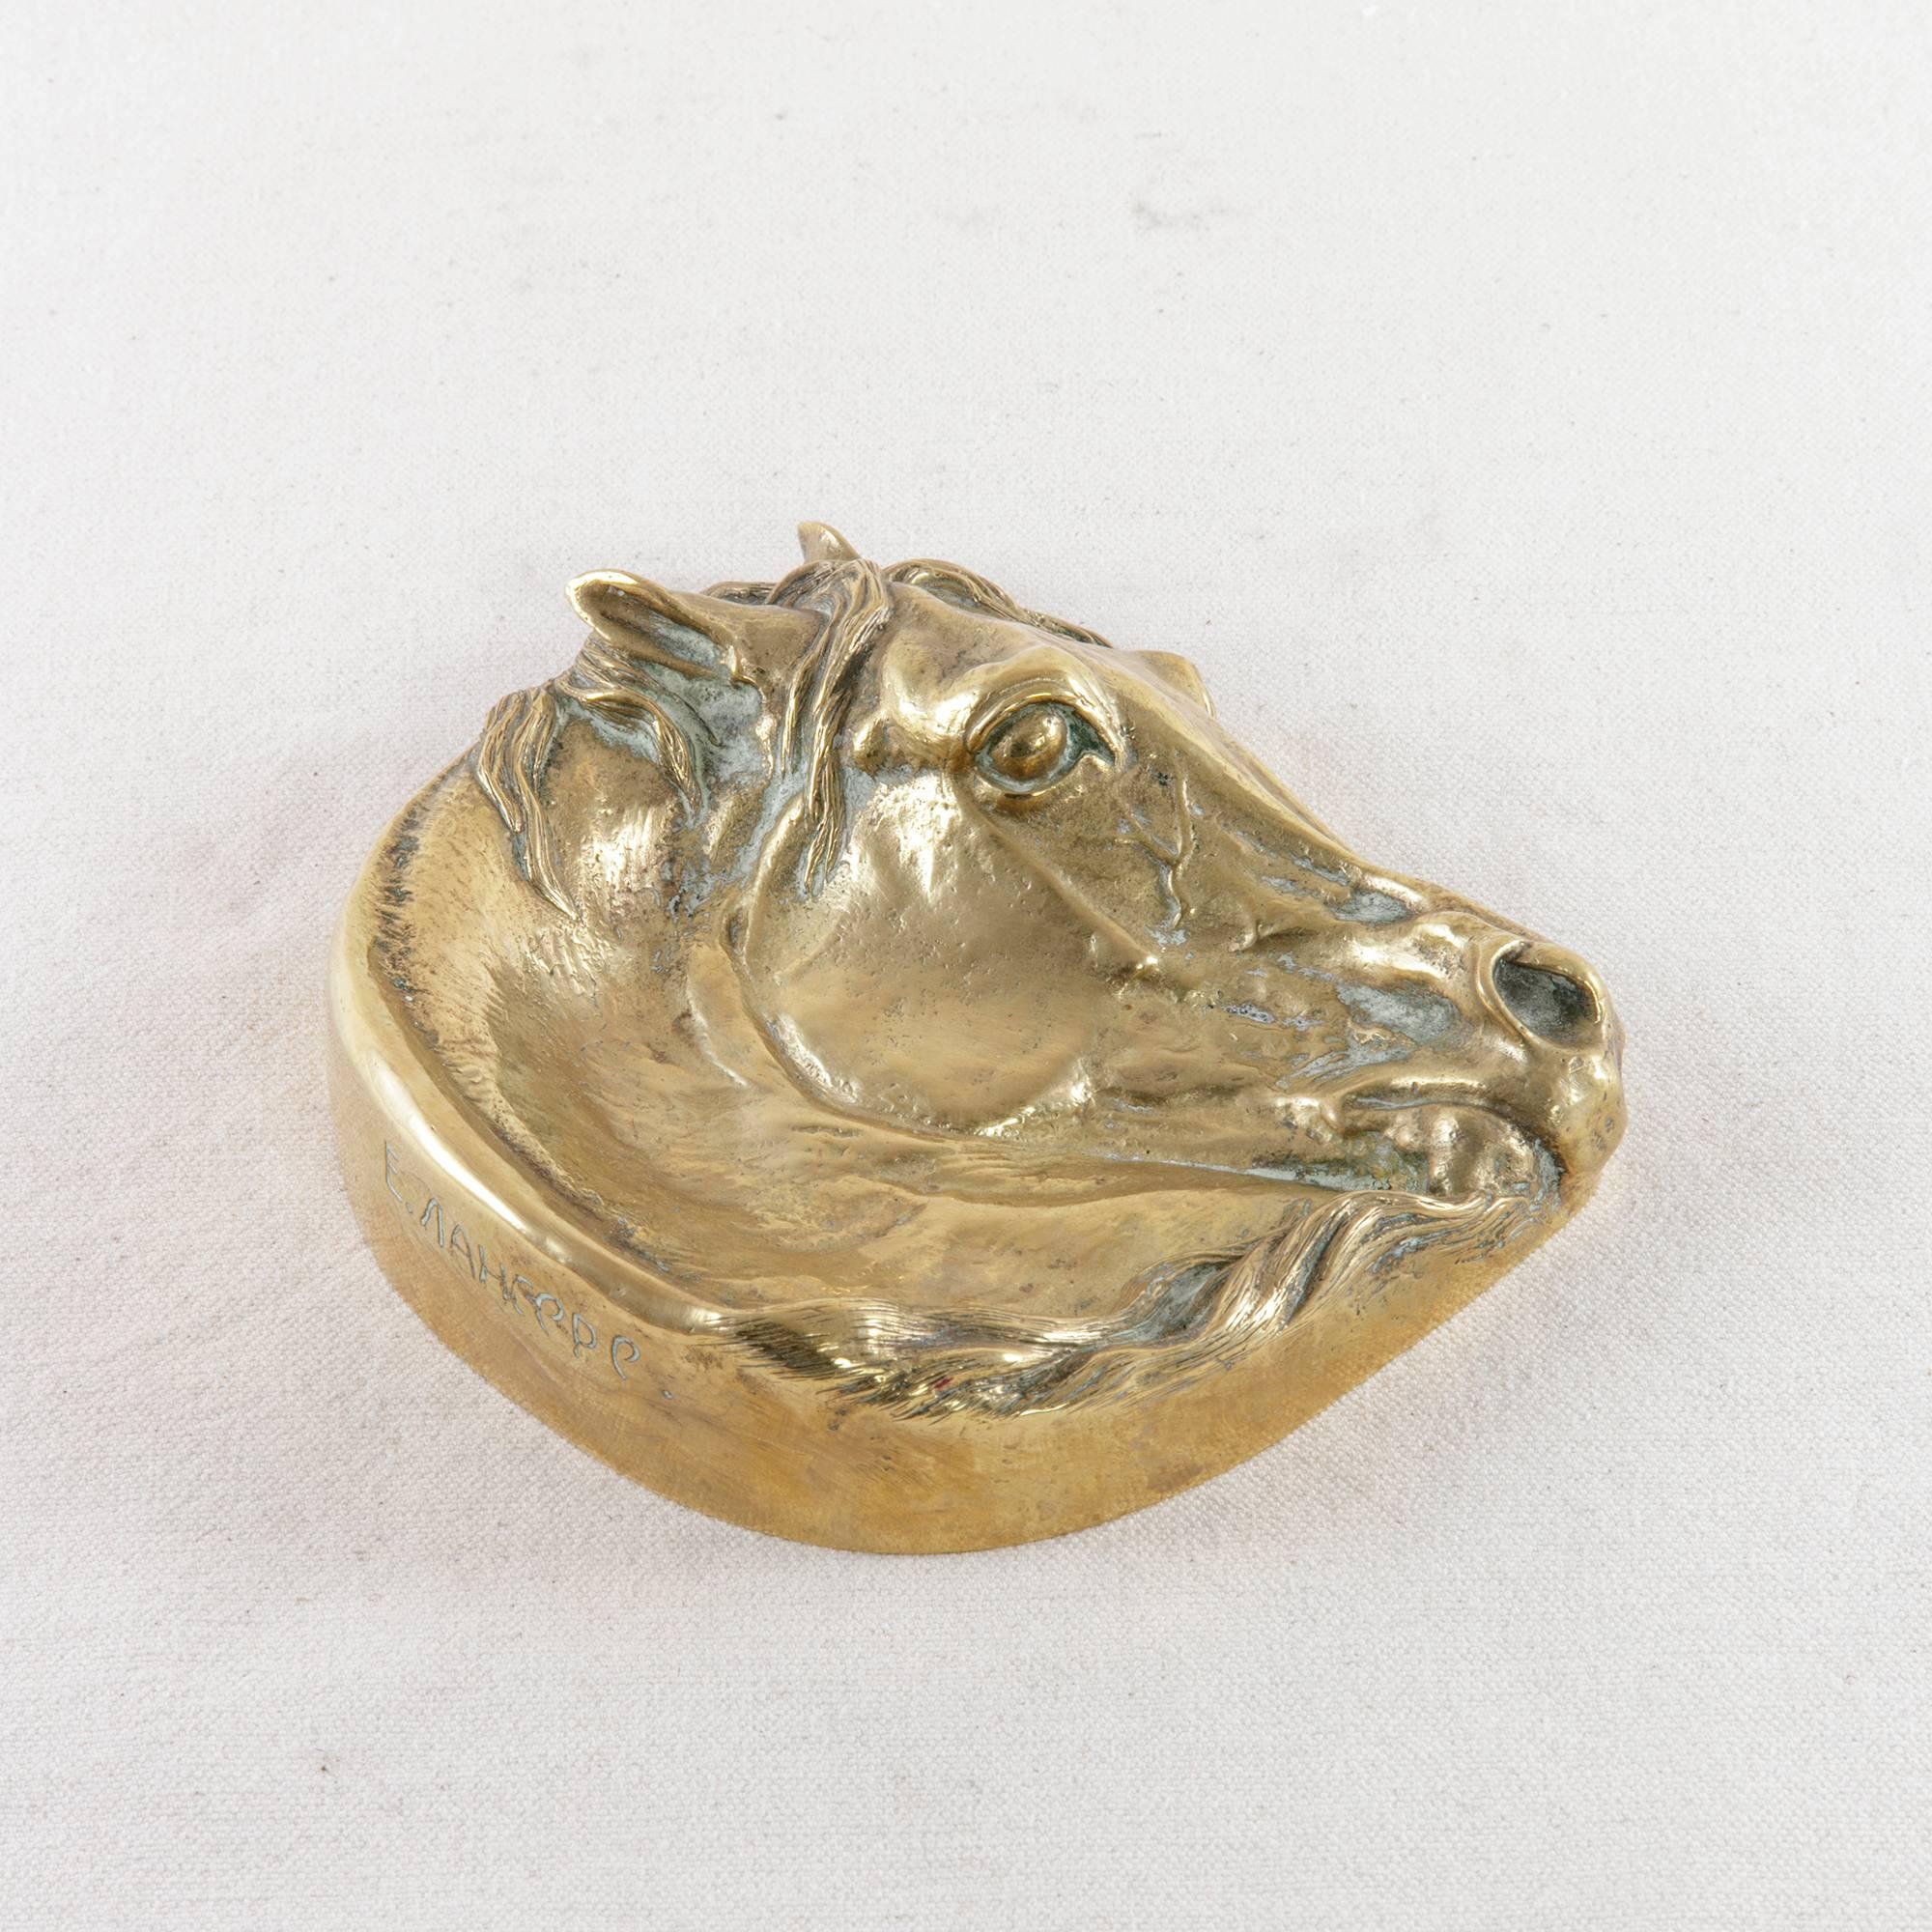 French 19th Century Bronze Vide Poche or Dish of a Horse's Head Signed by E. Lancere